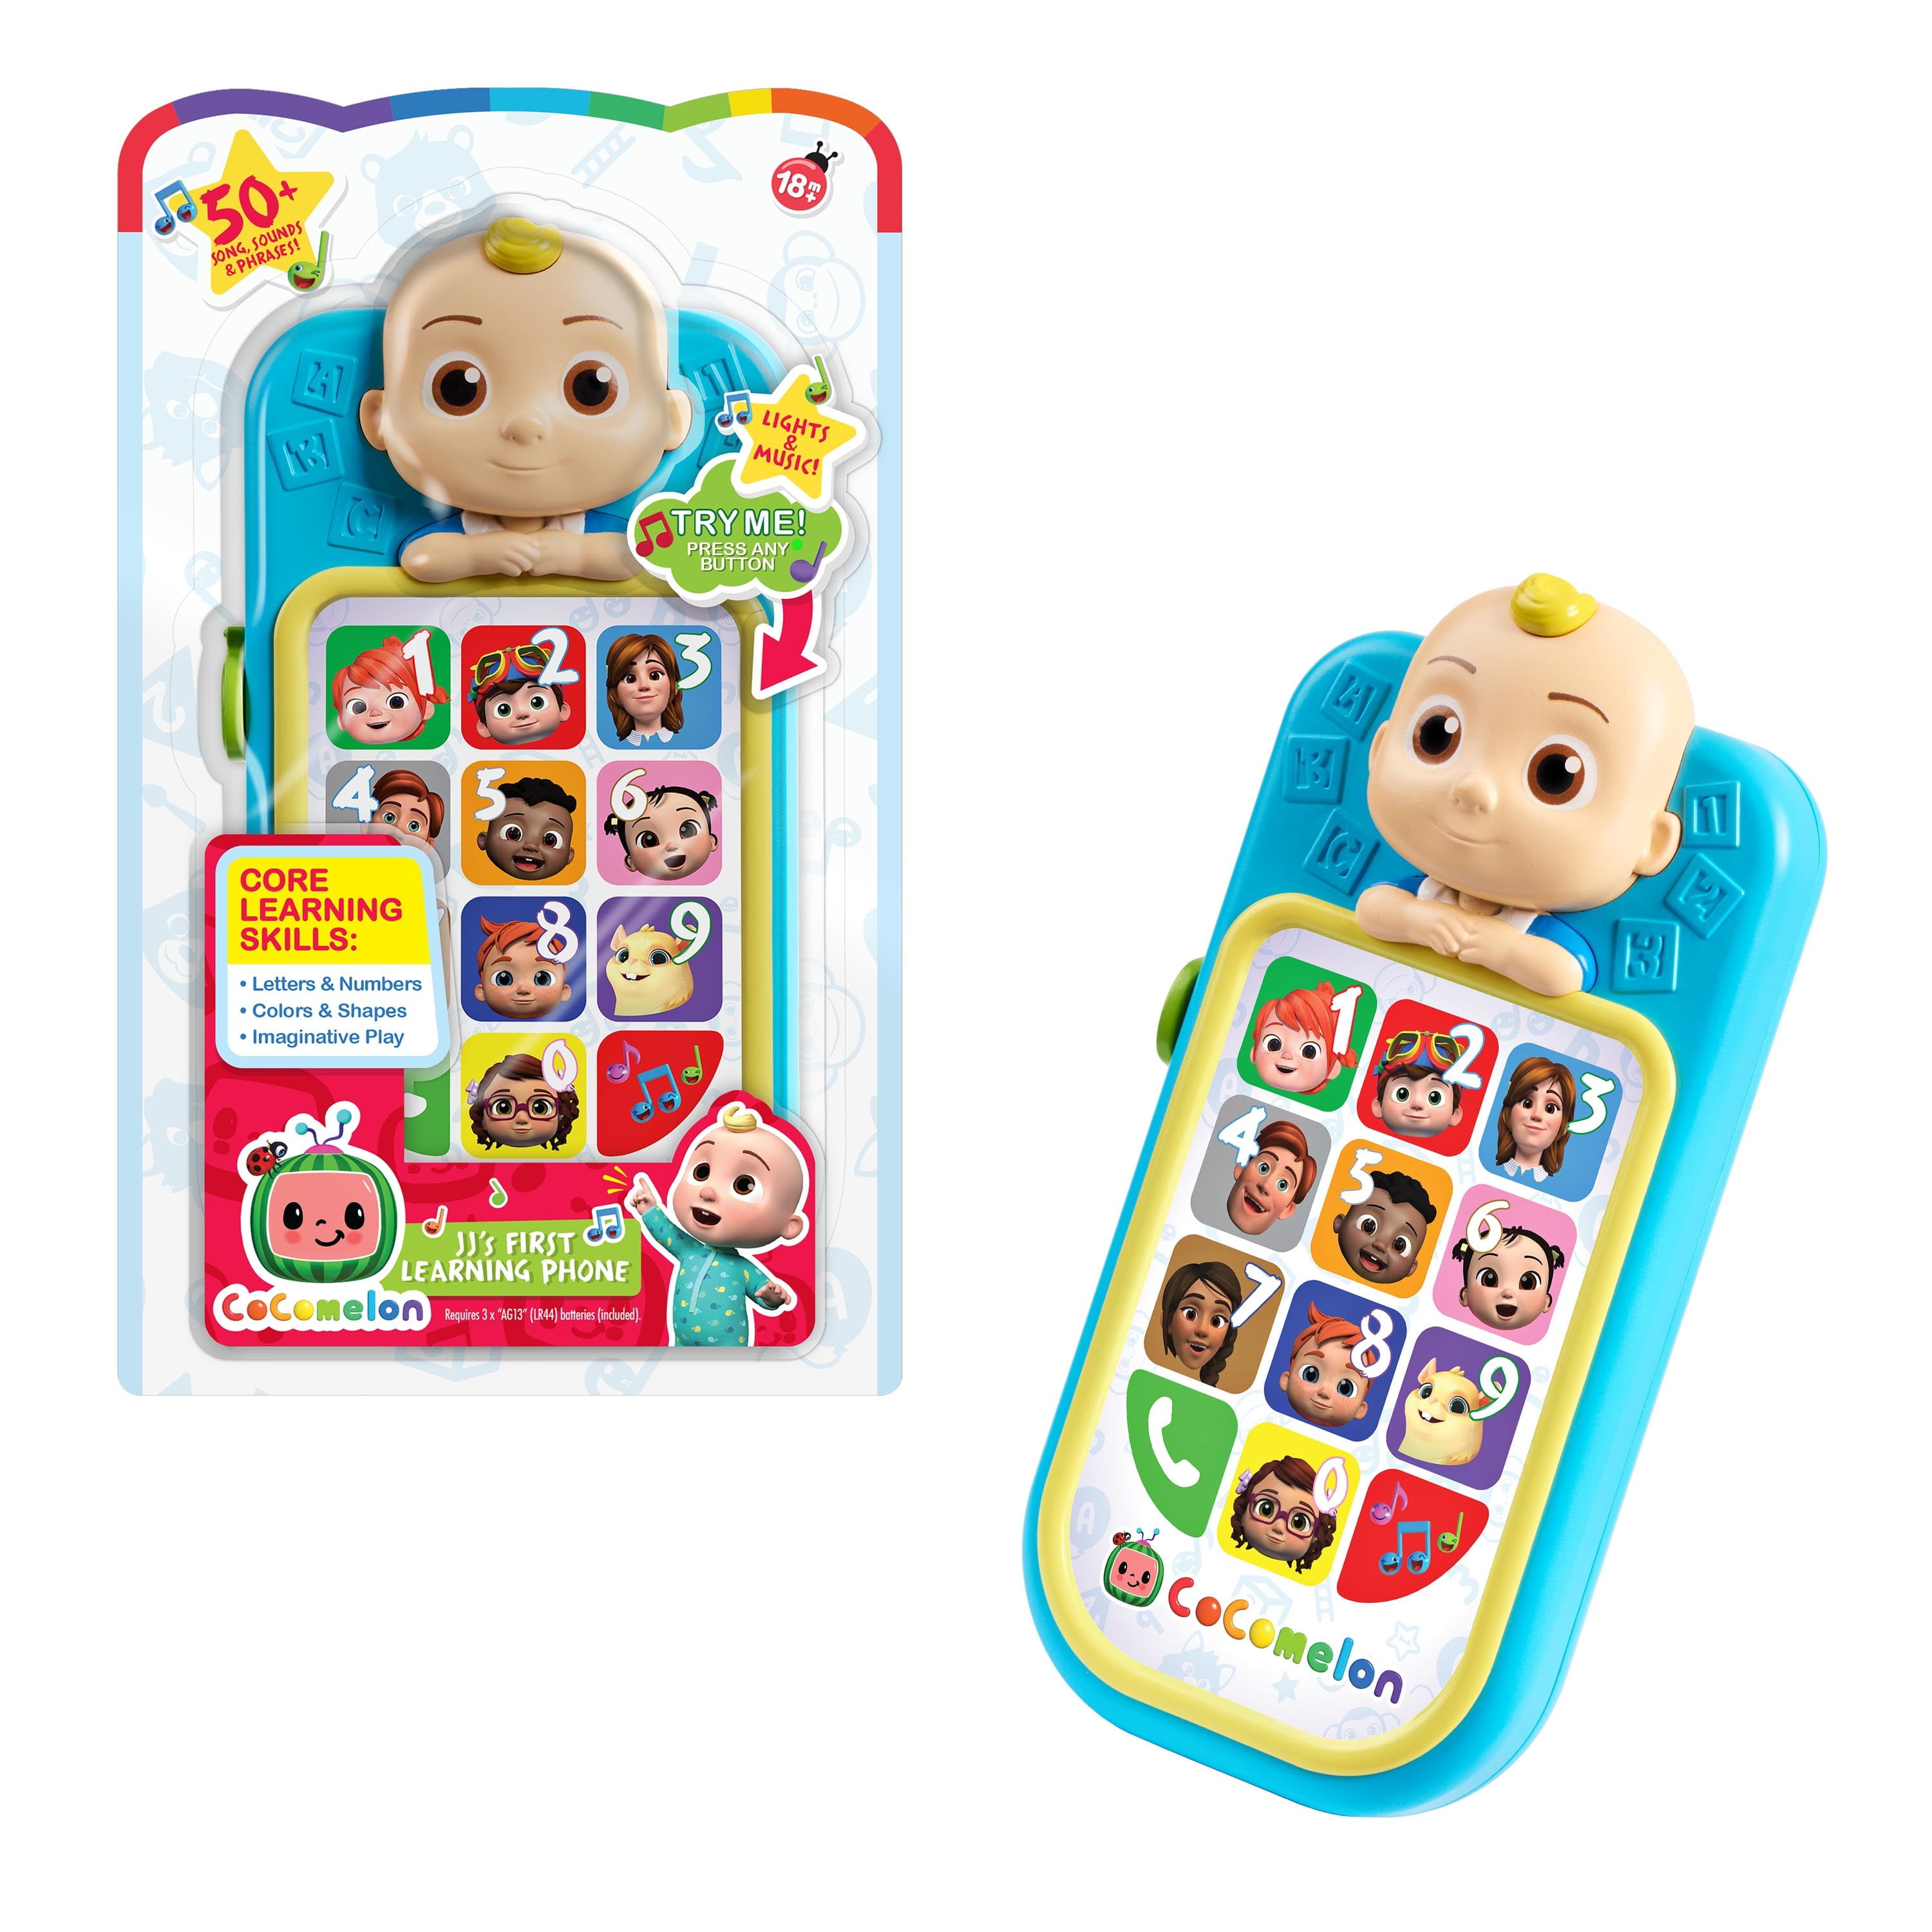 Cocomelon JJs First Learning Toy Phone for Kids with Lights and Sounds, Kids Toys for Ages 18 month